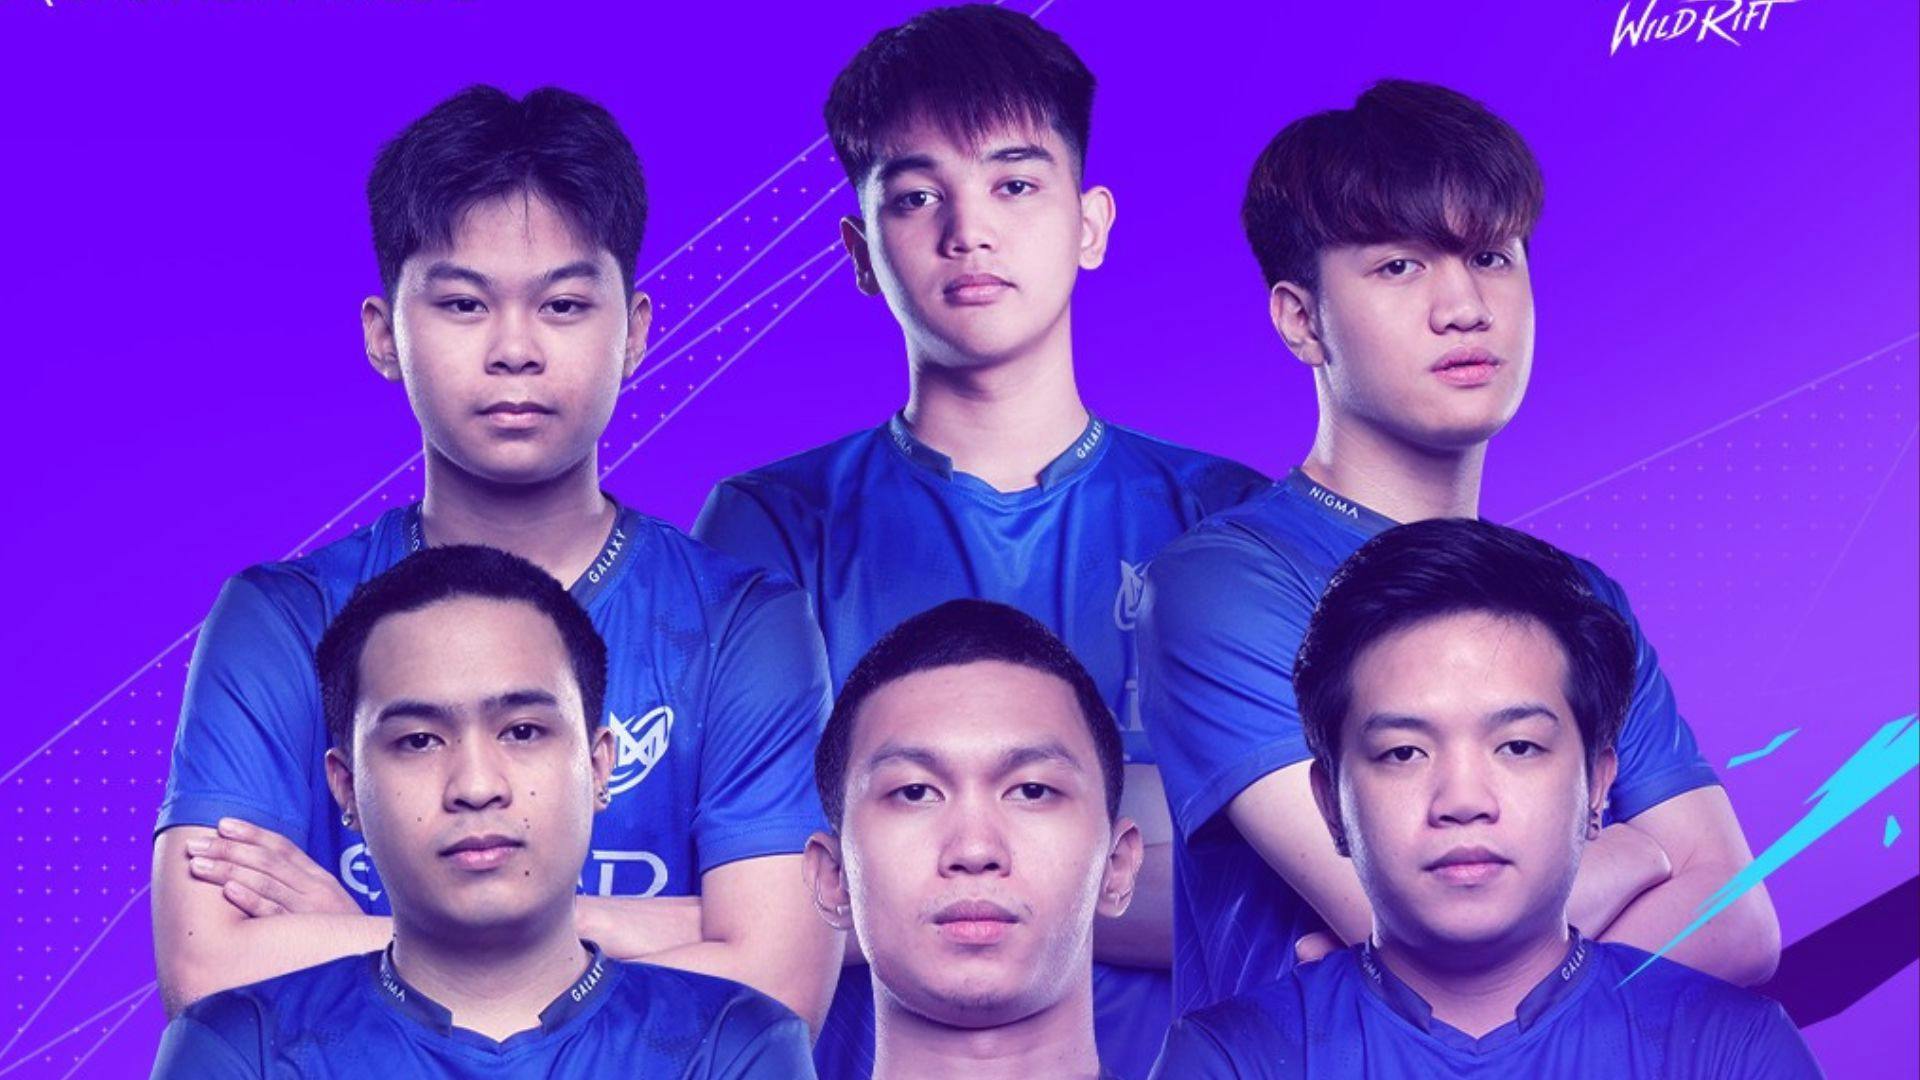 NGX hailed grand champions of SIBOL National Selection for League of Legends Wild Rift